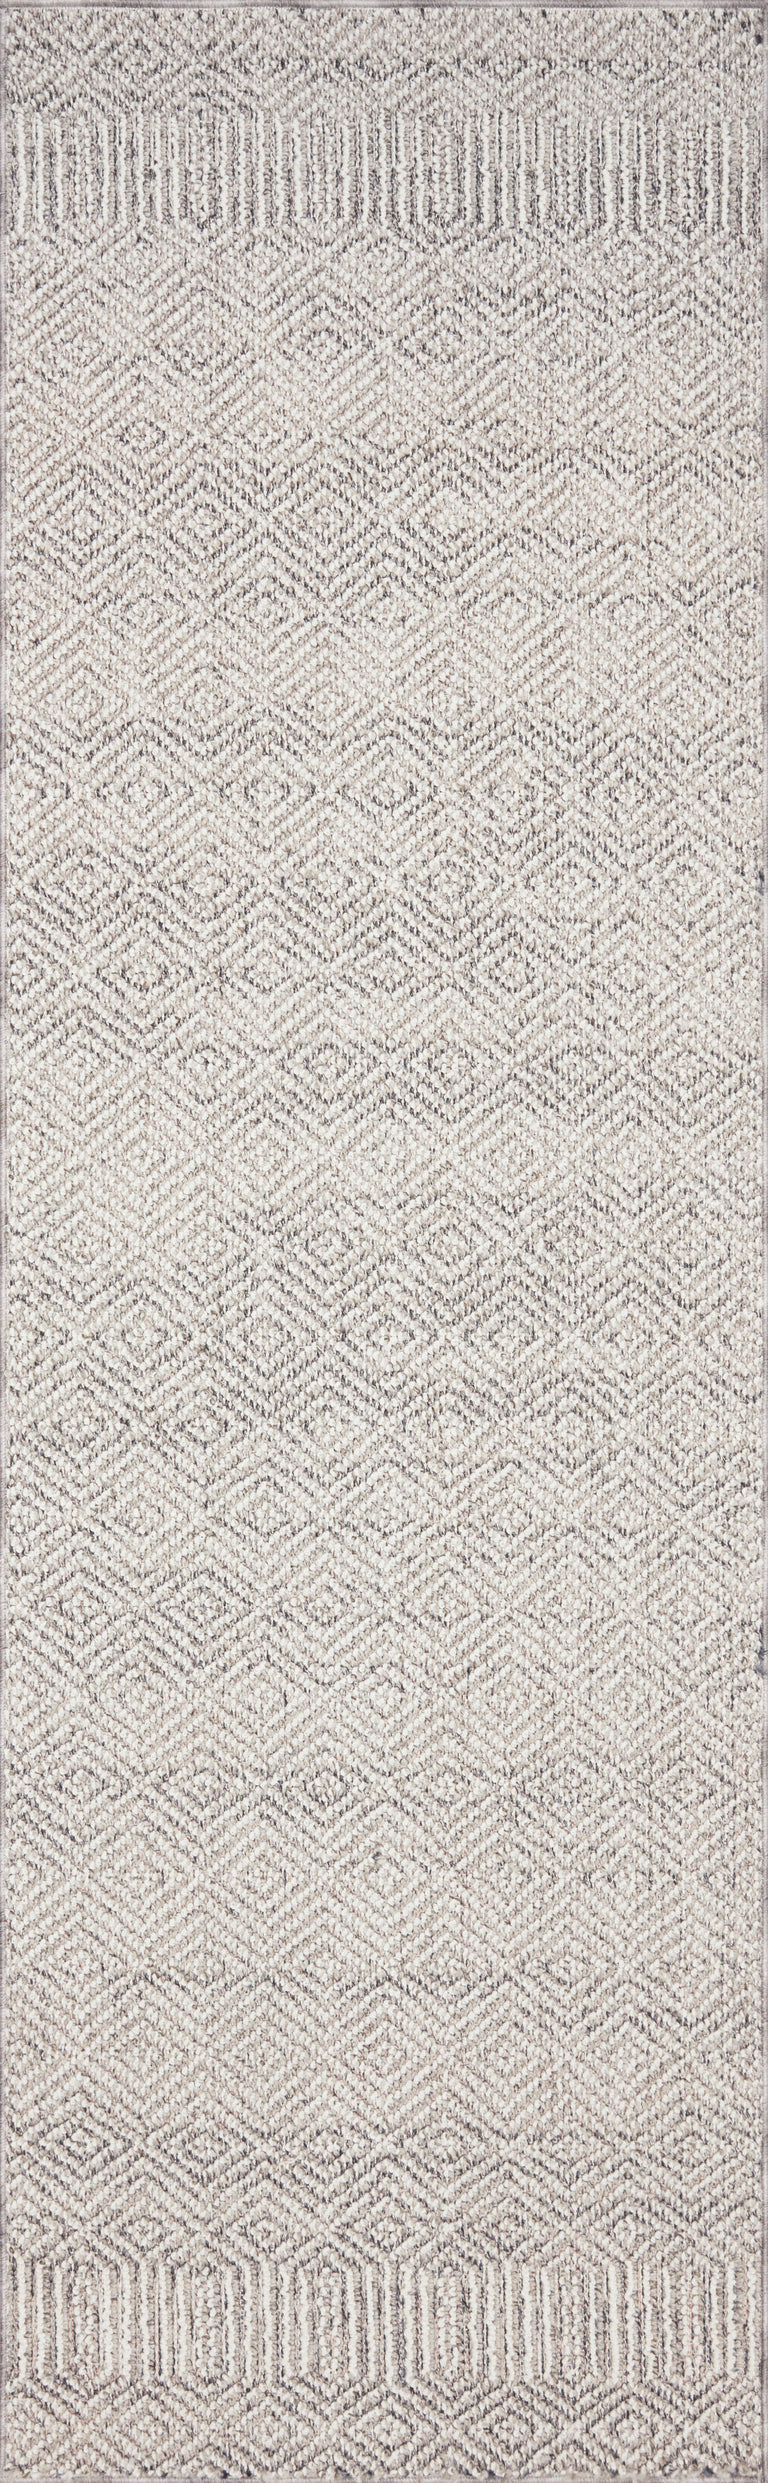 Loloi Rugs Cole Collection Rug in Grey, Bone - 9'6" x 12'8"